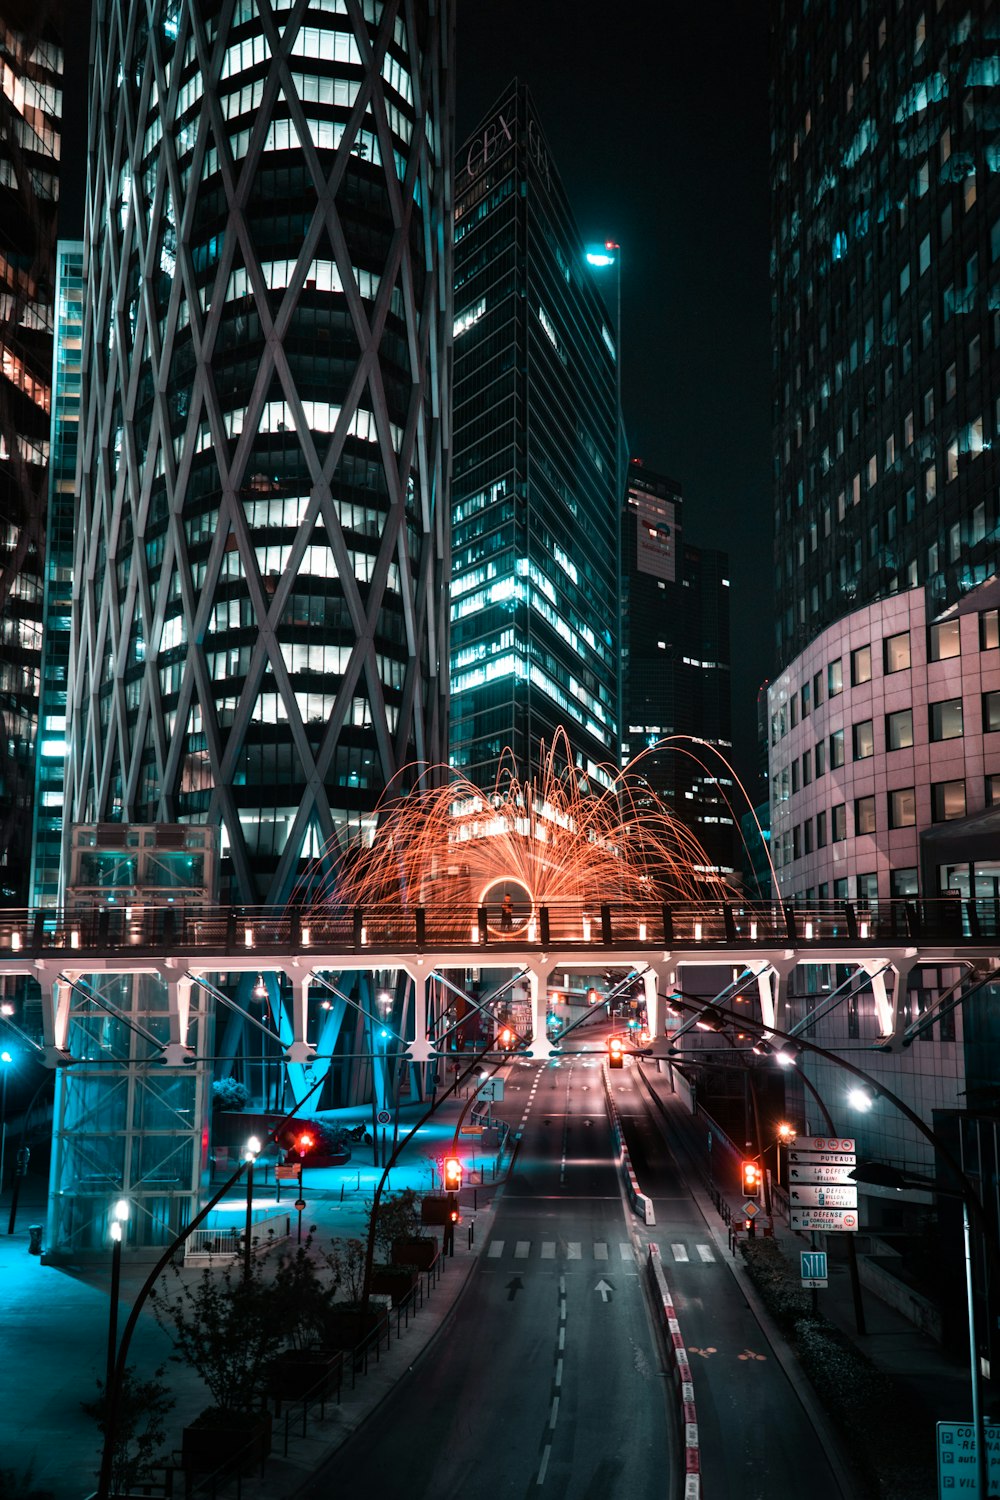 a bridge over a street in a city at night